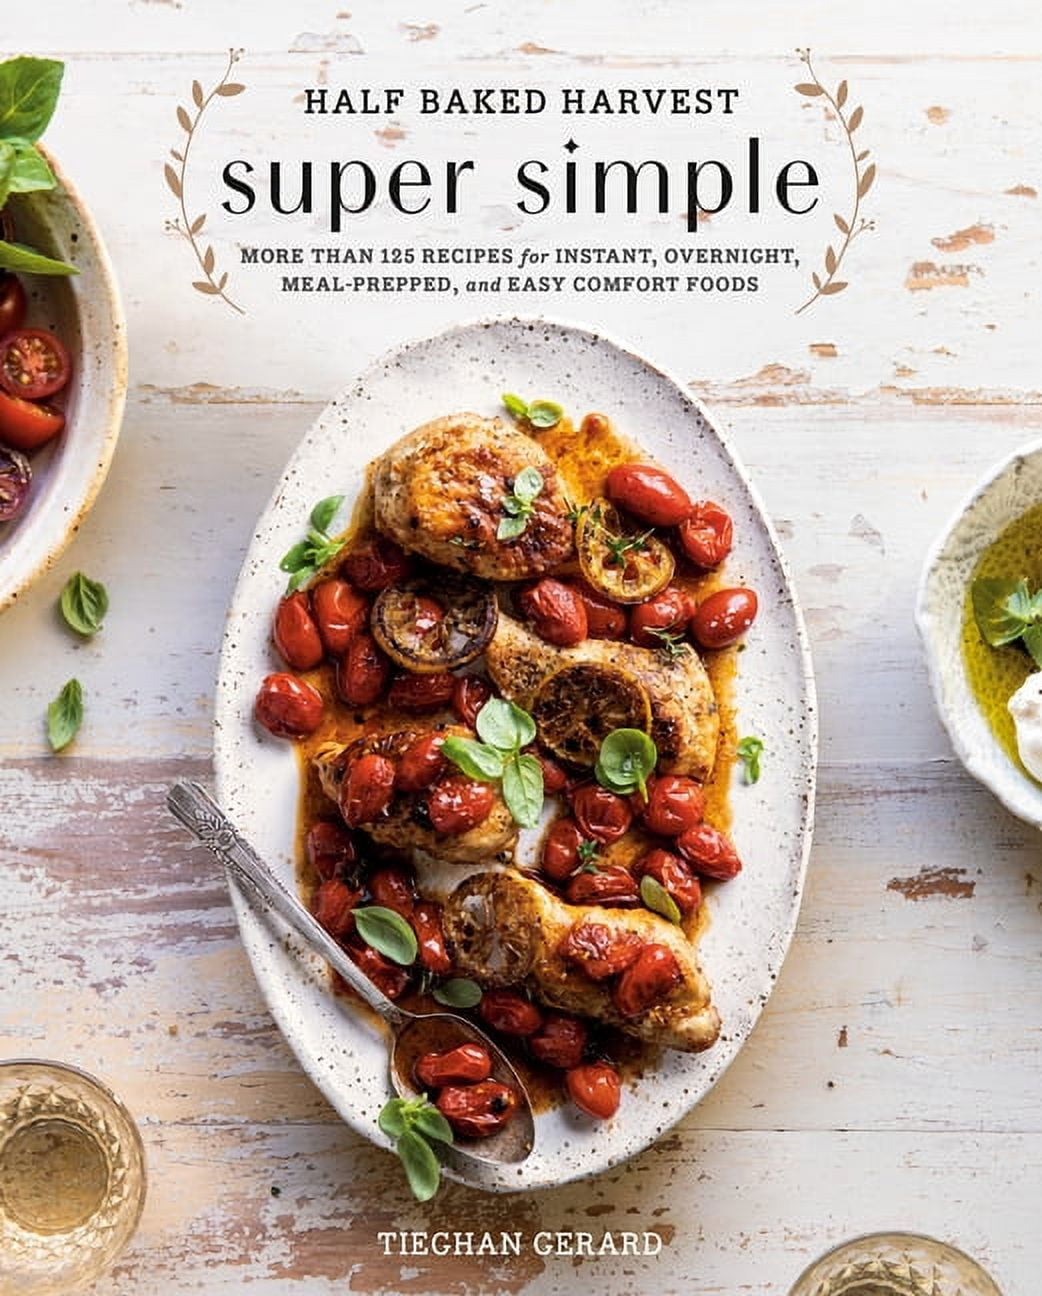 Half Baked Harvest Super Simple: More Than 125 Recipes for Instant, Overnight, Meal-Prepped, and Easy Comfort Foods: A Cookbook [Book]